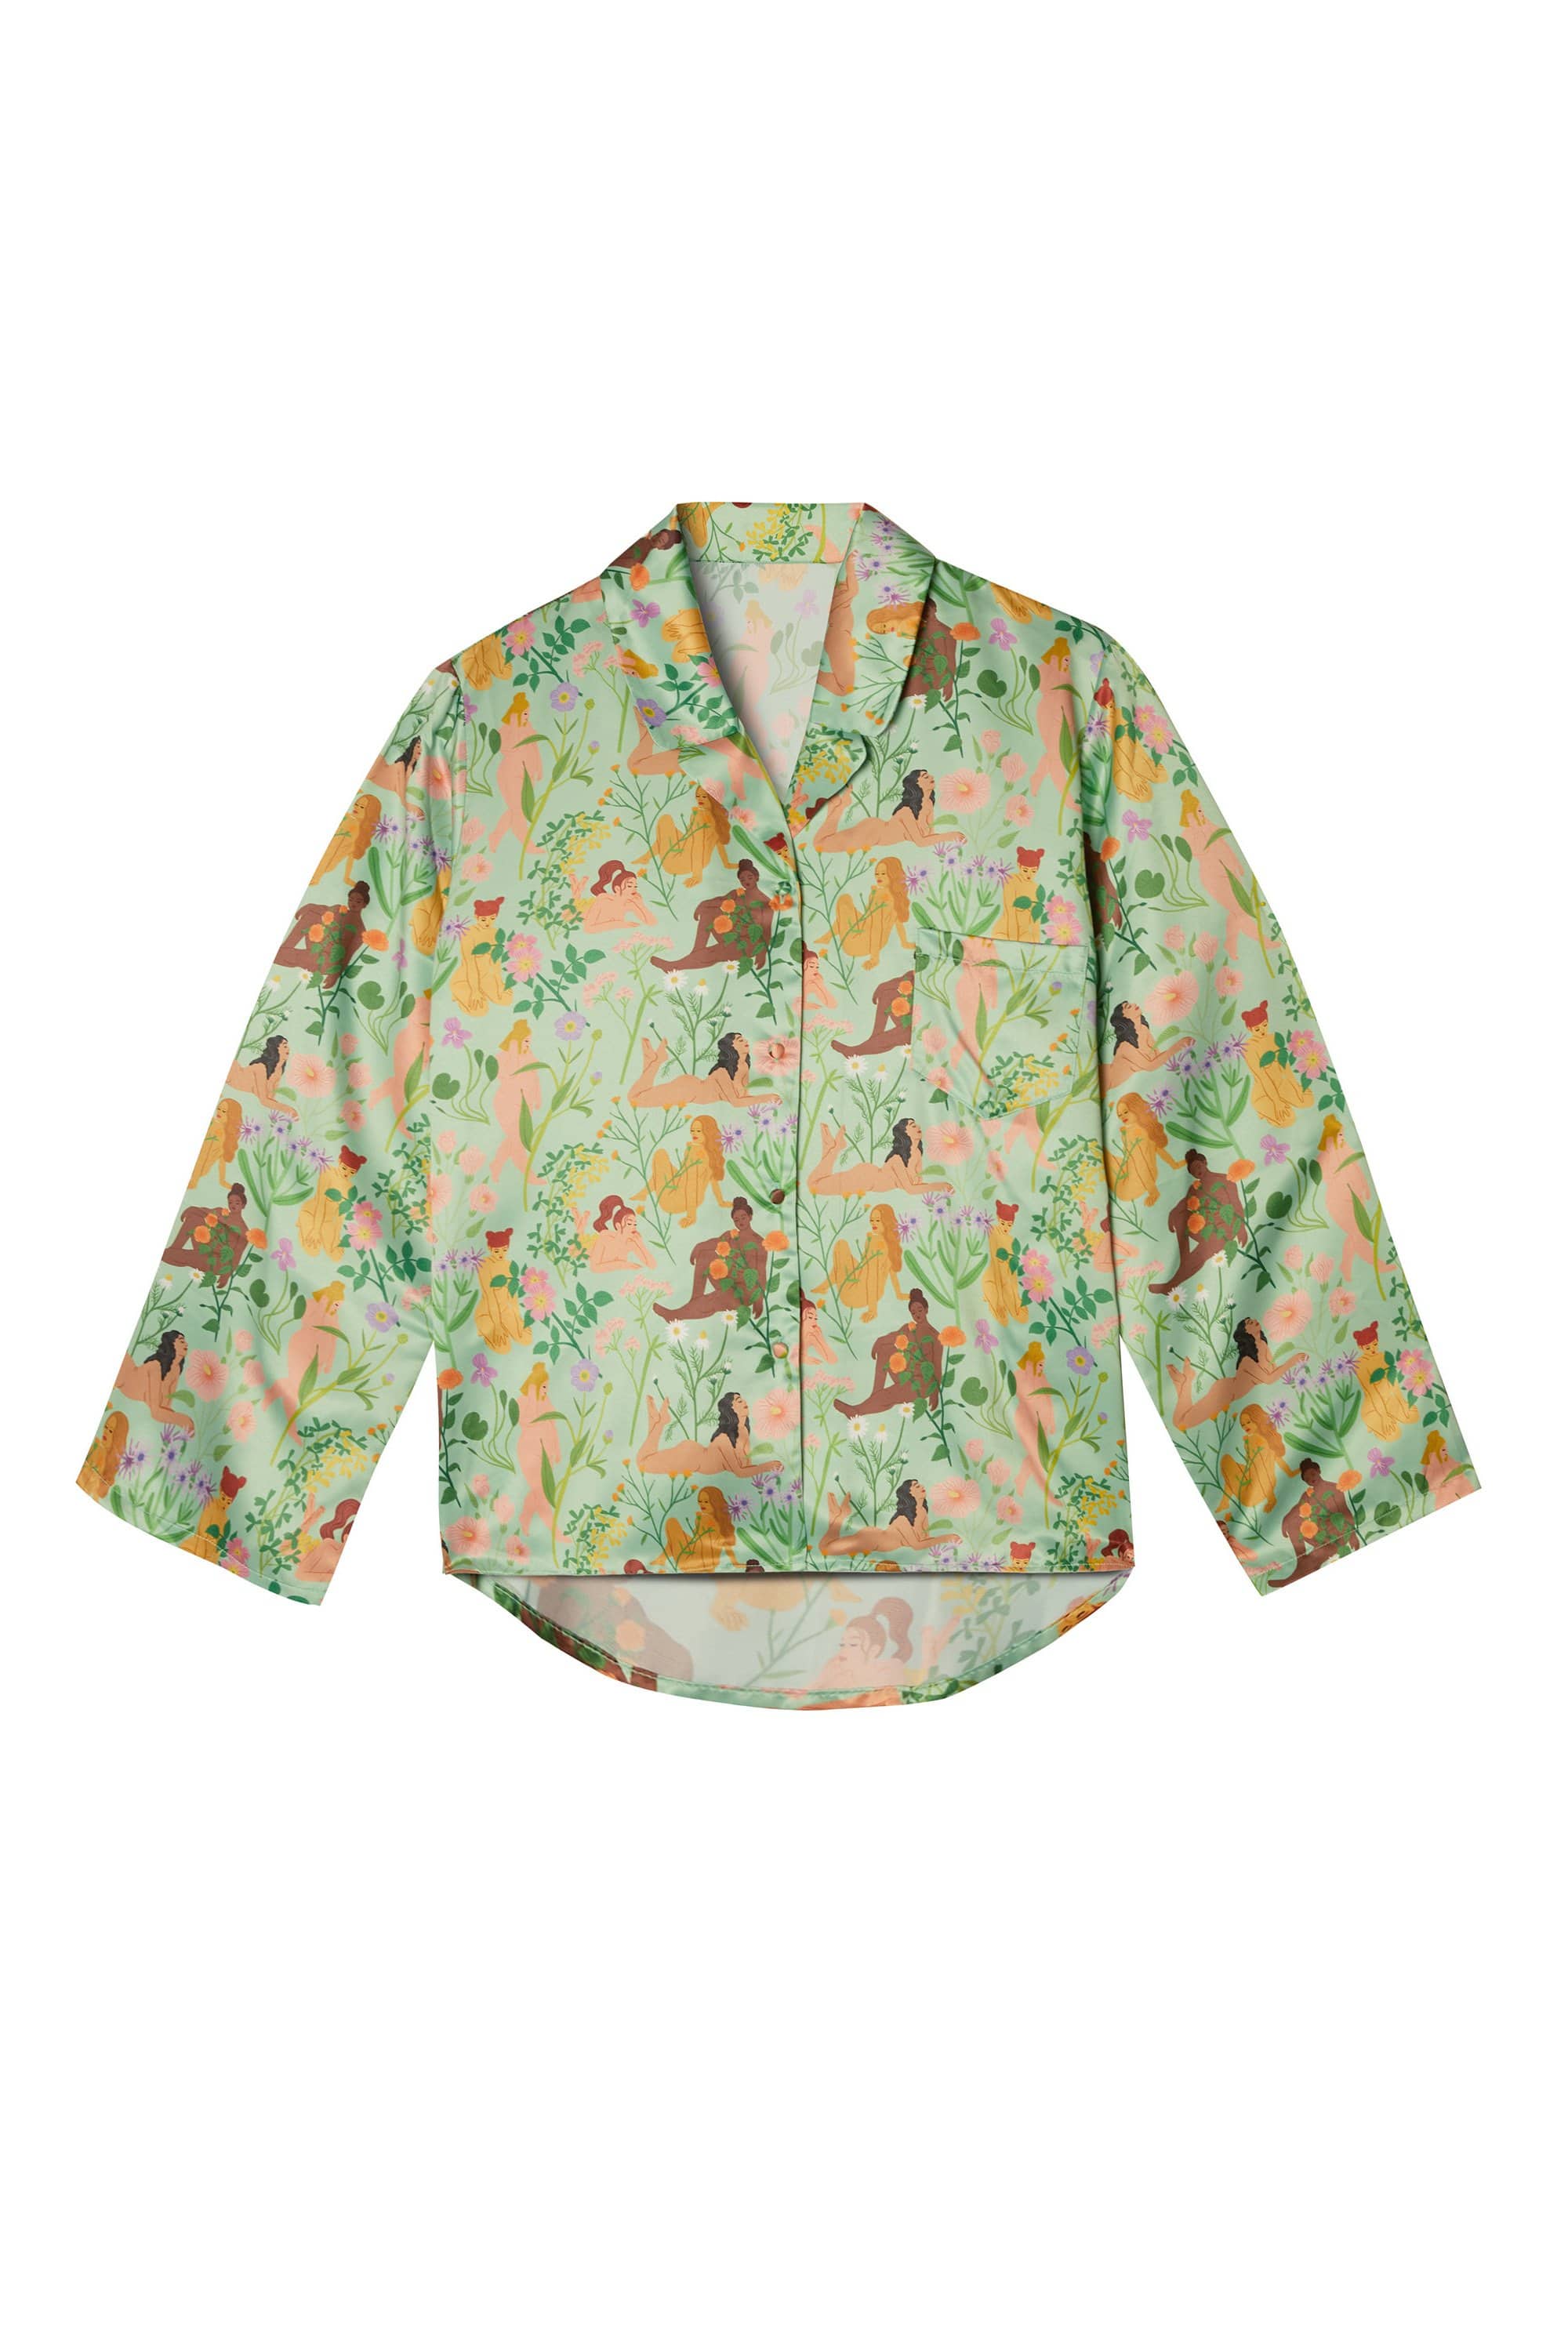 Bodil Jane Recycled Nudes & Flowers Shirt